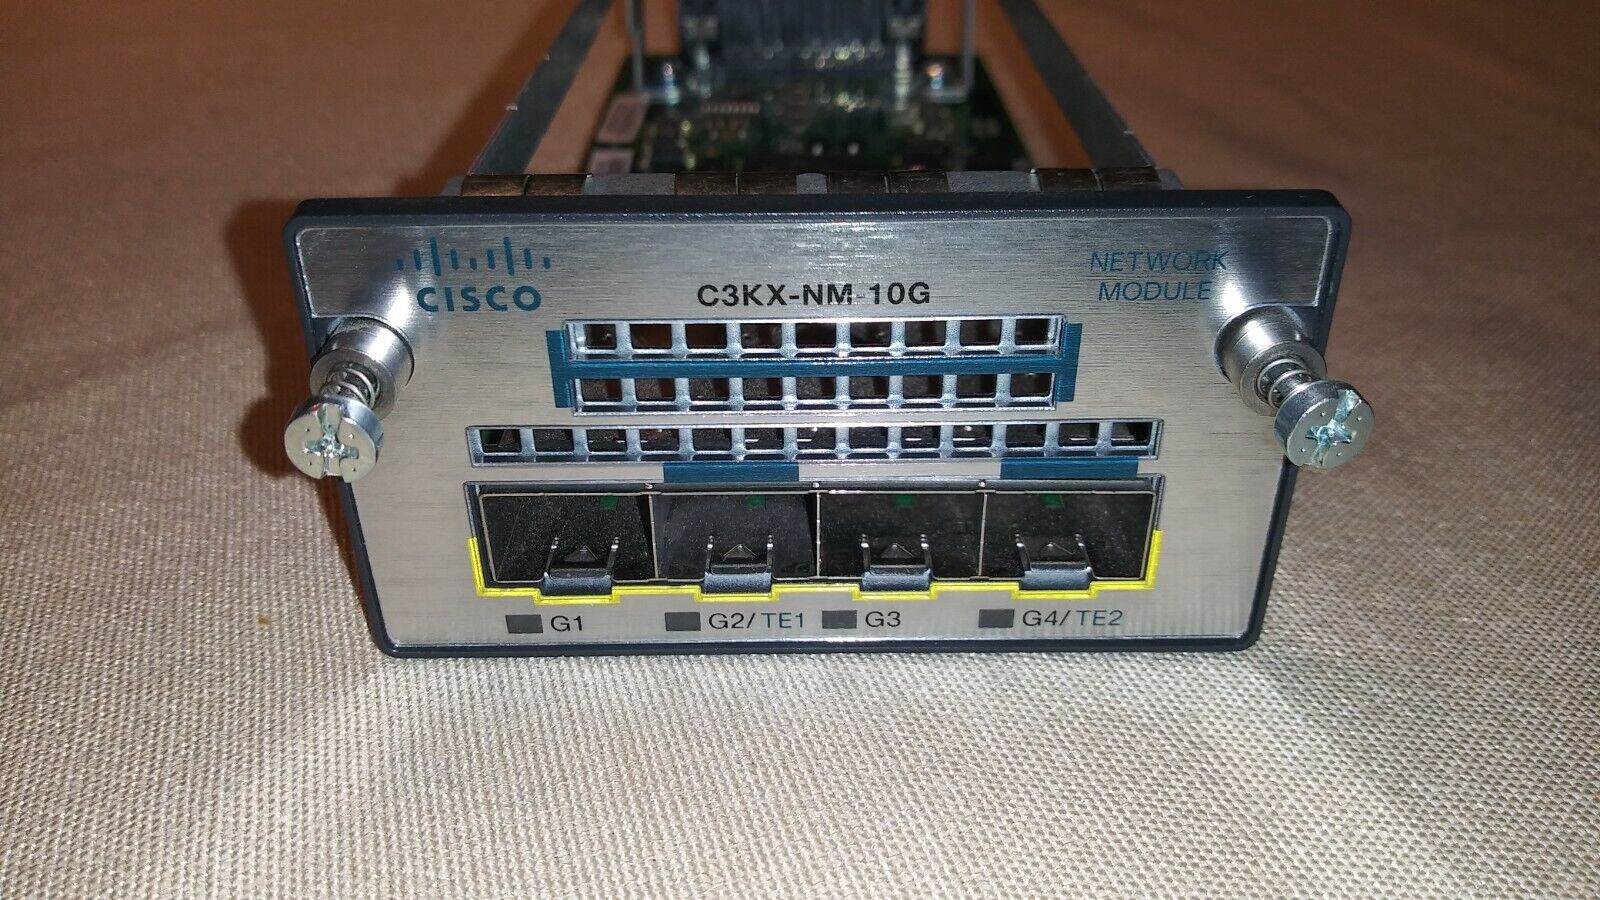 Cisco C3KX-NM-10G network module for Cisco Catalyst 3750-X and 3560-X